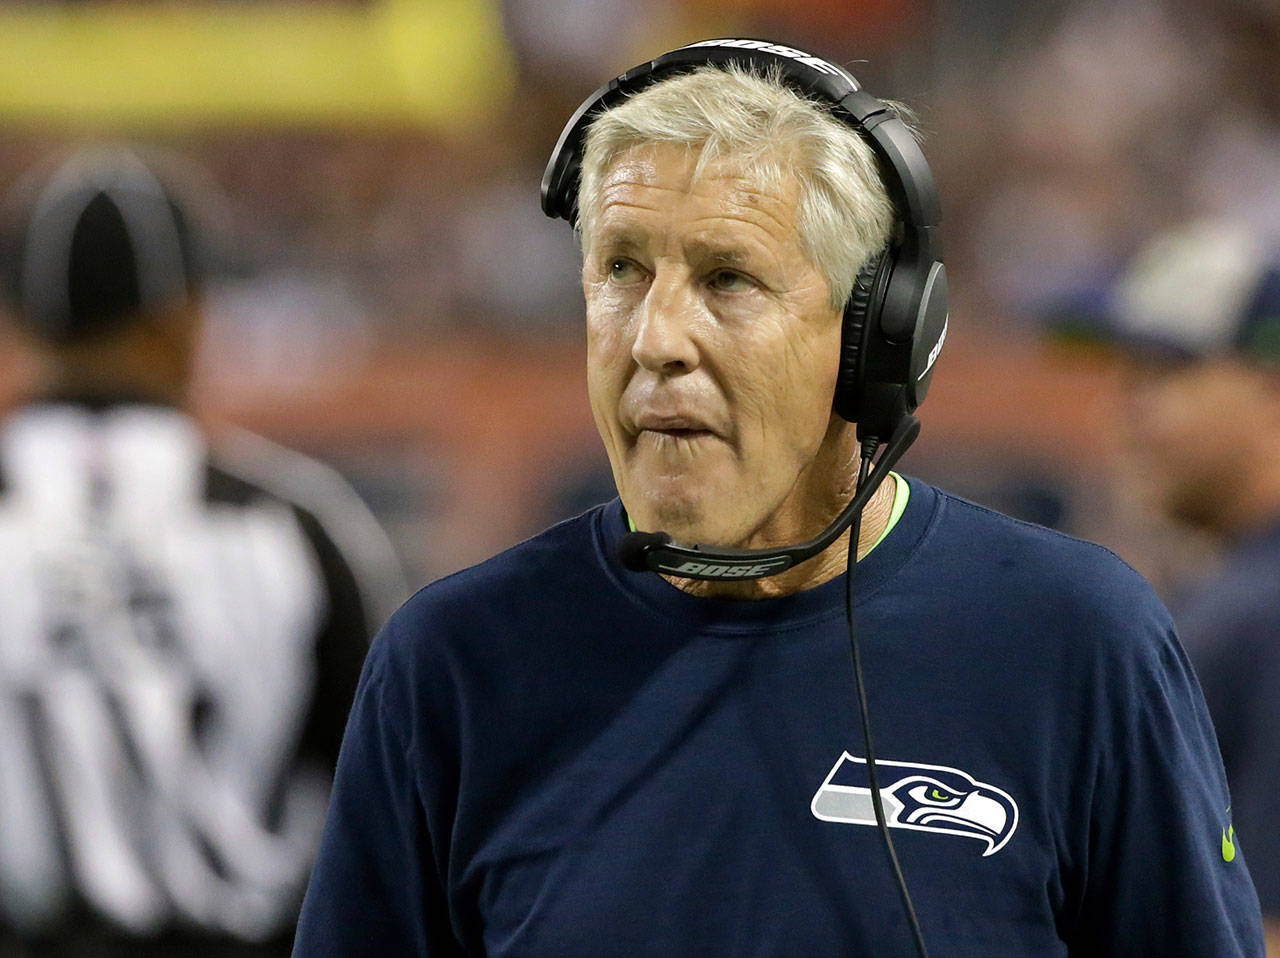 Seahawks head coach Pete Carroll looks at the scoreboard during the first half of a game against the Bears on Sept. 17, 2018, in Chicago. (AP Photo/David Banks)